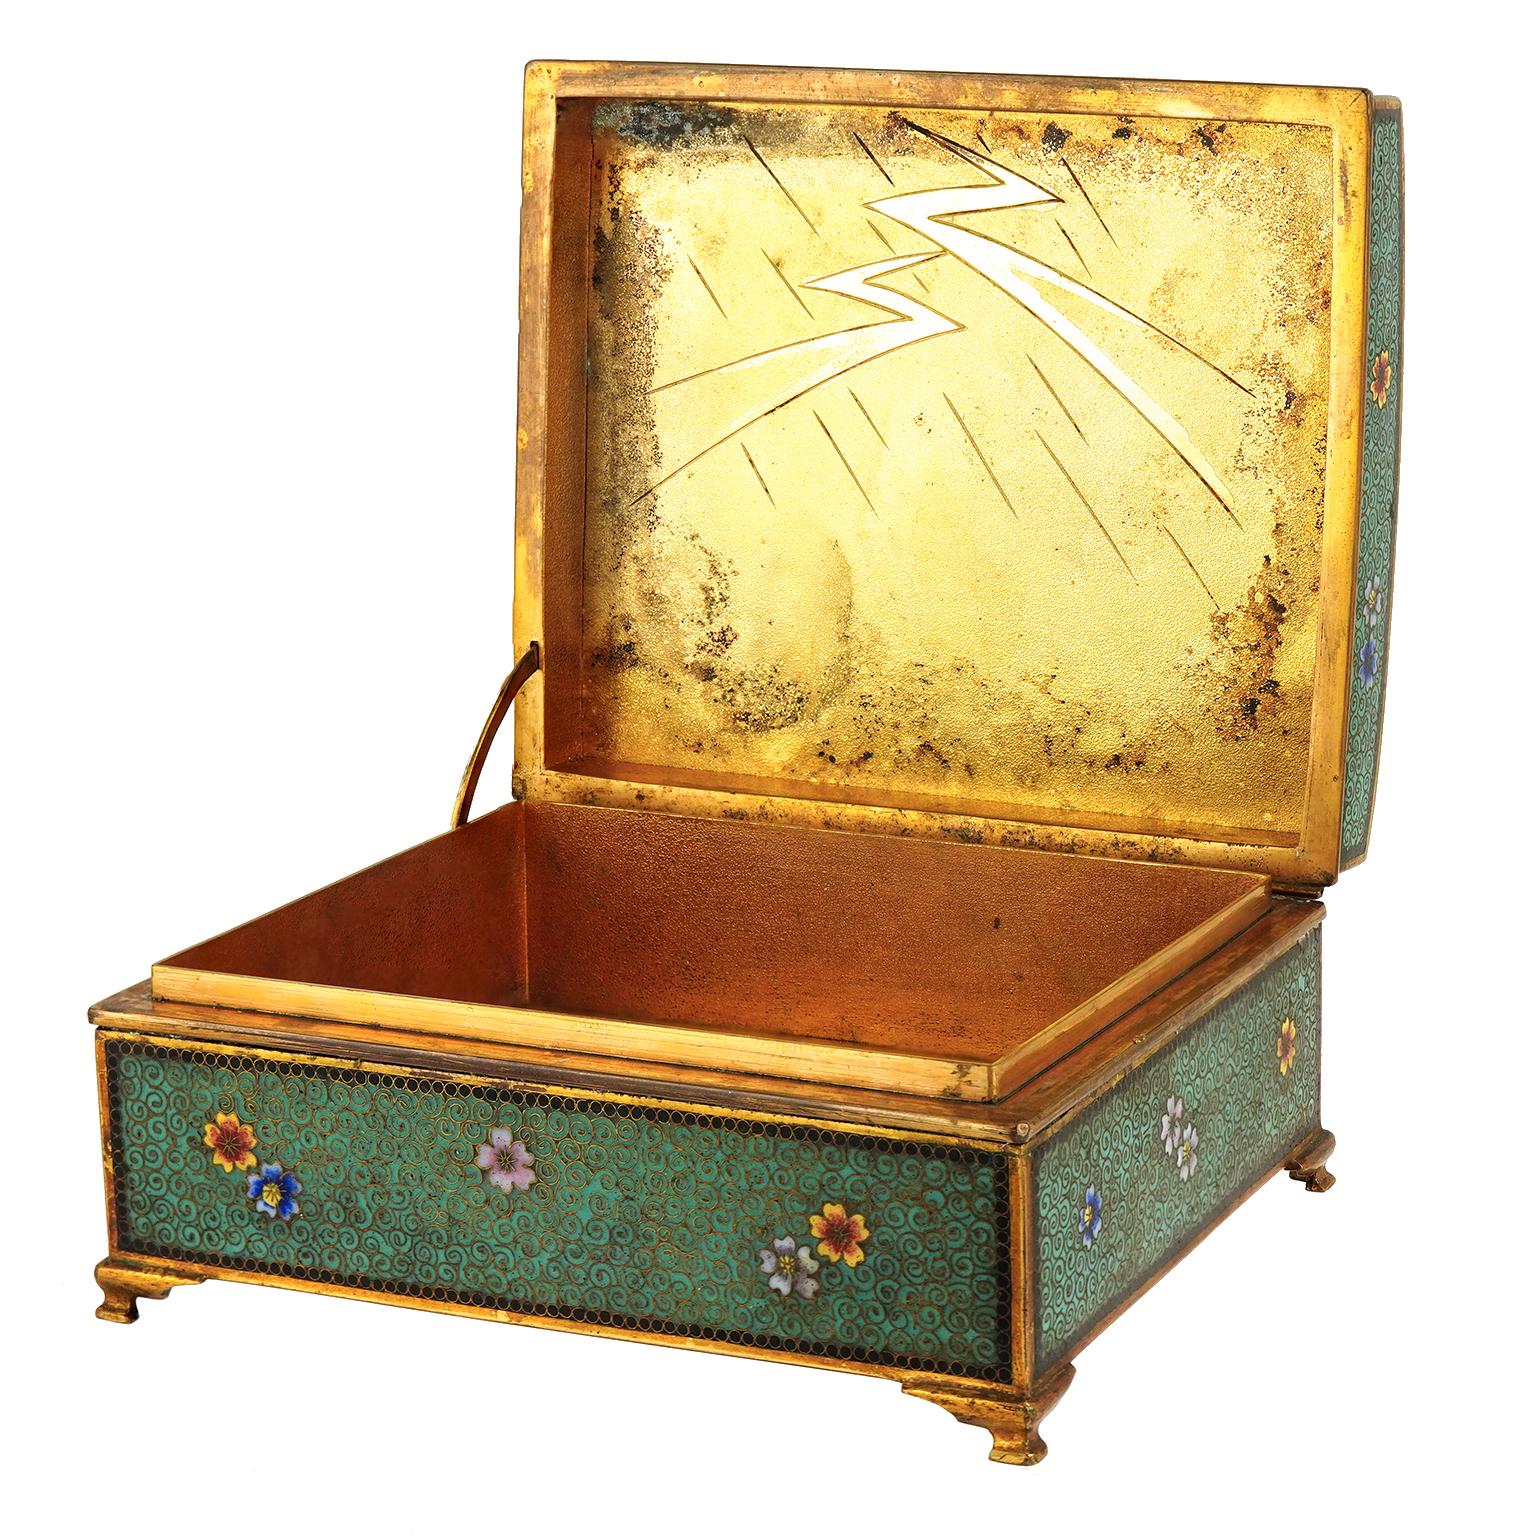 Circa 1880s, Japan.  This late 19th-century Japanese box features a stunning floral scene primarily of morning glories. The enamel work is superb with delicate colors and a combination of Cloisonné & Champlevé work.  The box is bronze and copper